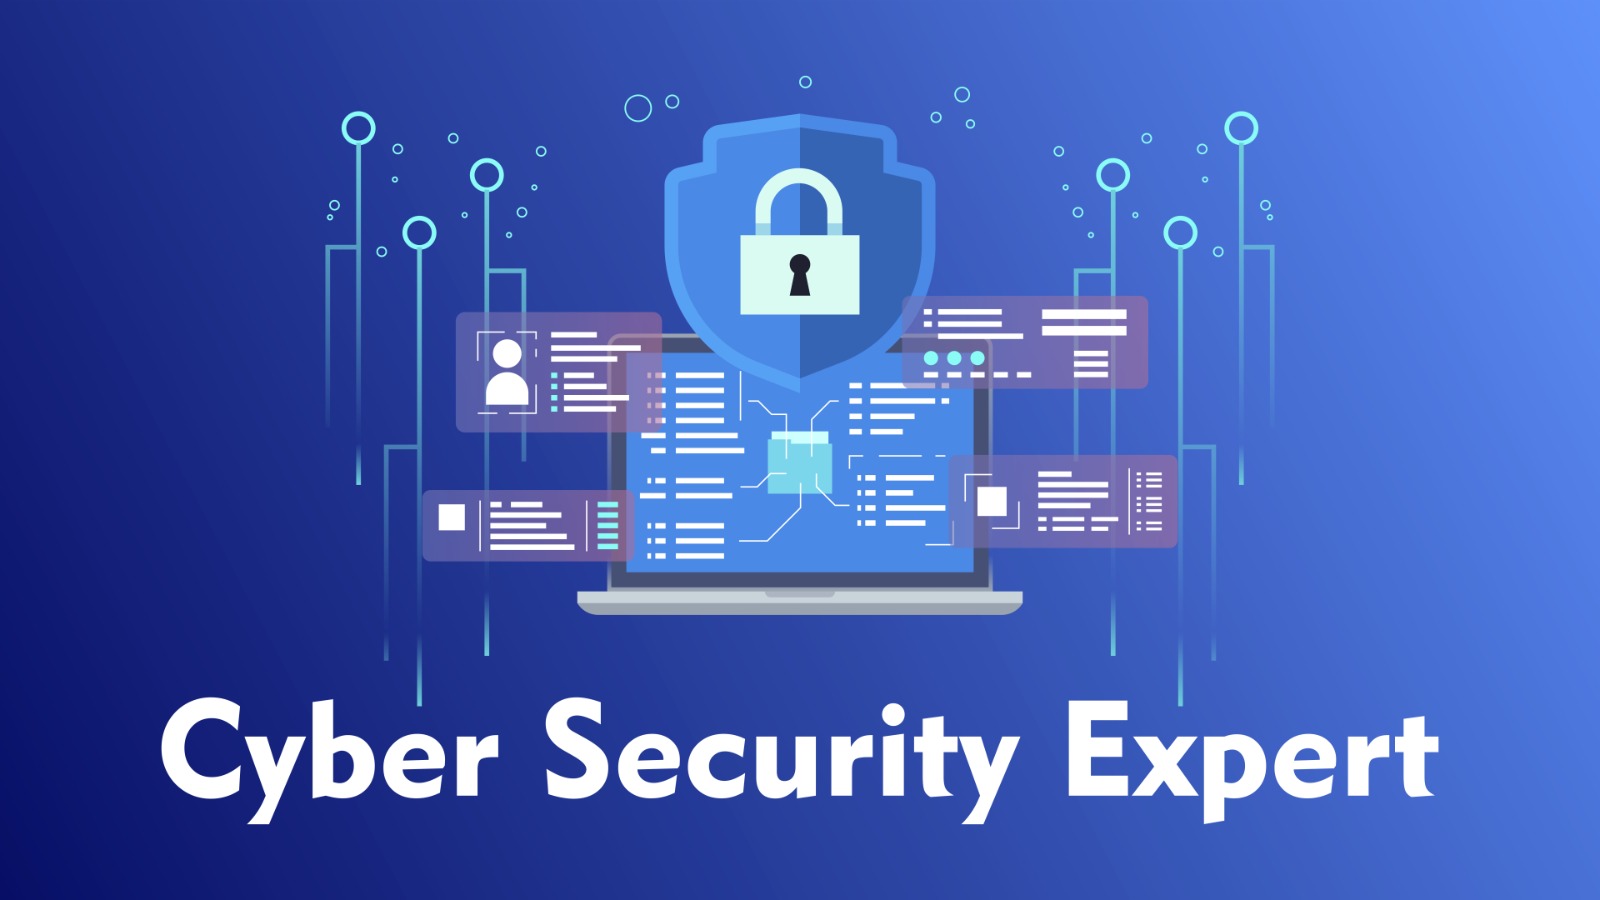 cyber security expert india, cyber security expert, cyber security india, cyber risk management, cyber security consultant, cyber security services, cyber security strategy, cybersecurity consulting services, cyber security technology, cyber security trends, cyber security consulting firms, cyber security specialist, cyber security consulting expert, cyber security services india, cyber security technologies, cyber security management